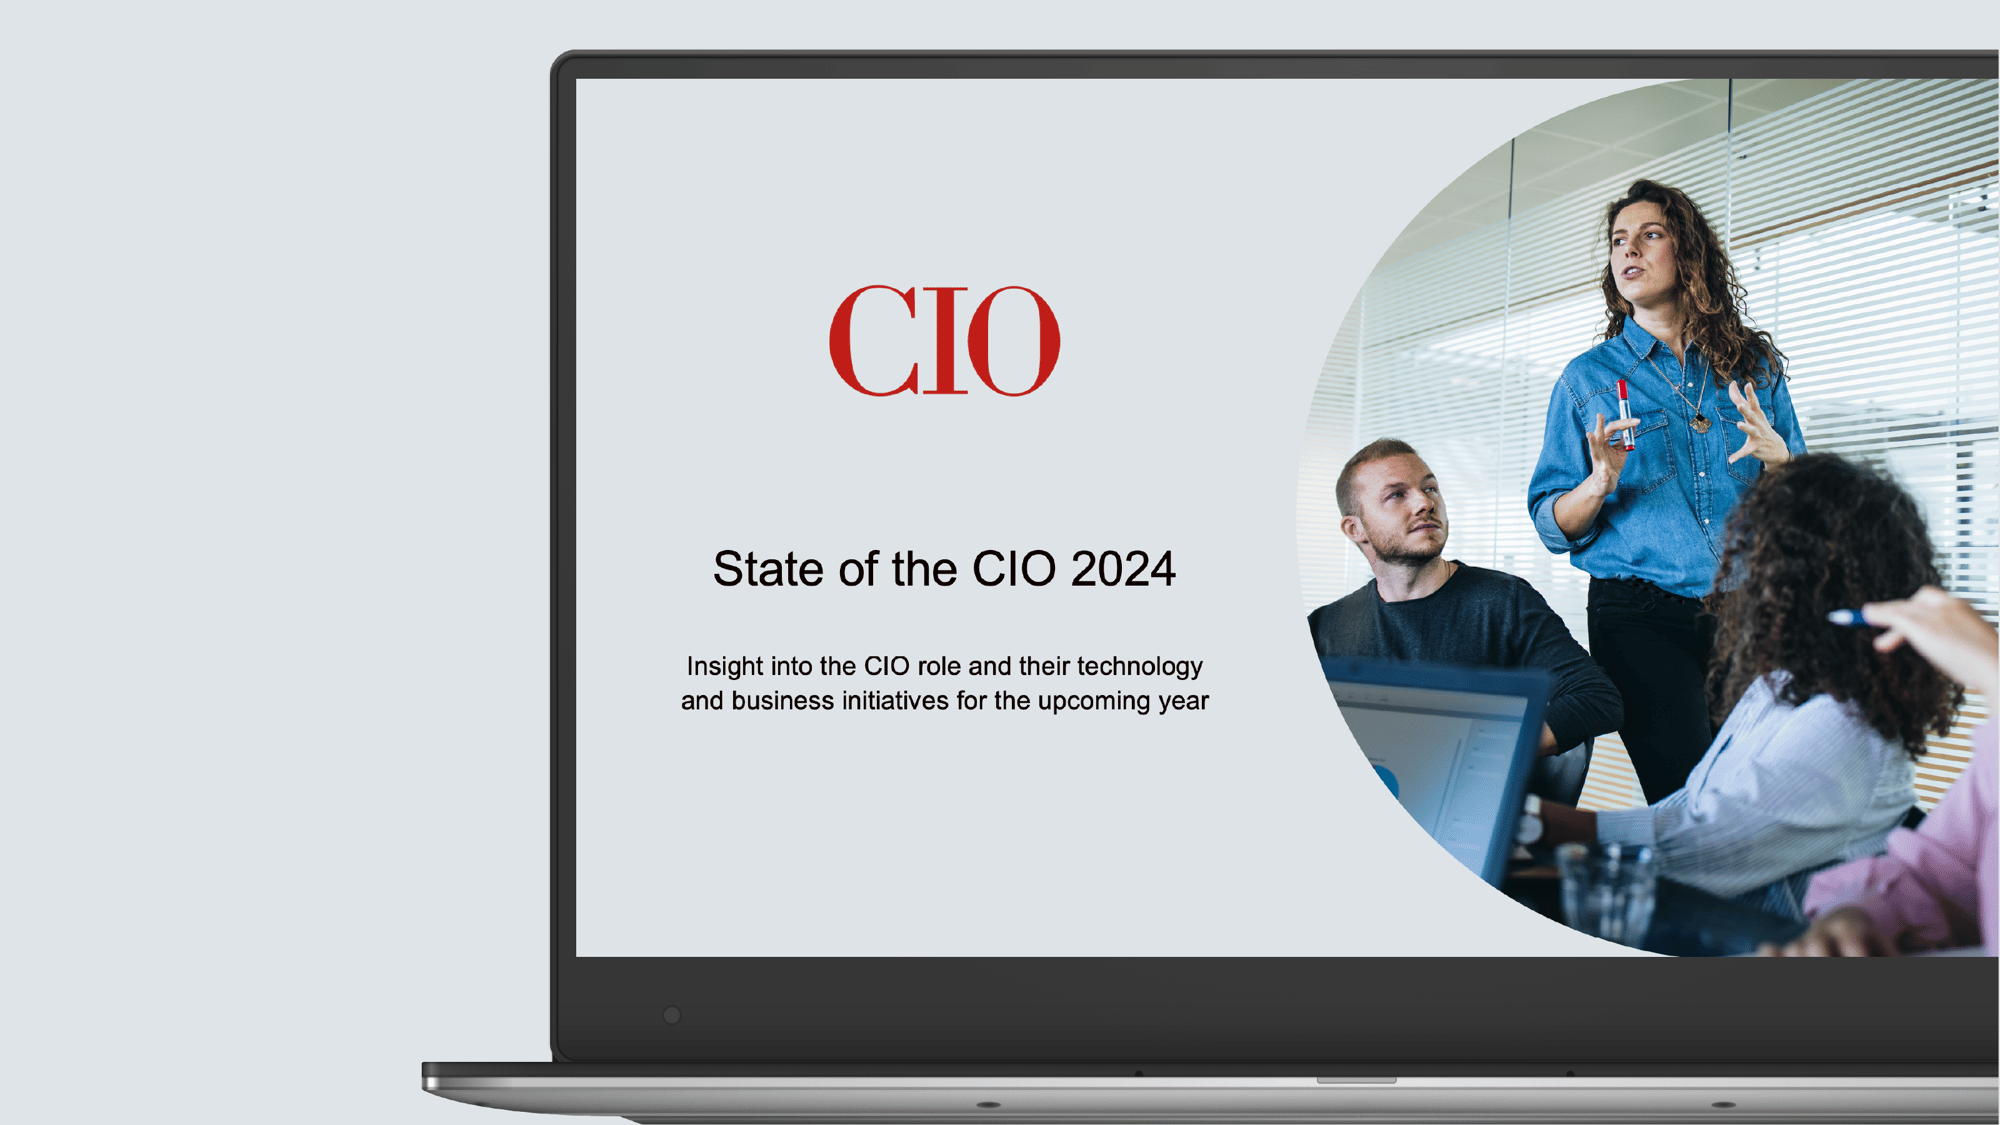 State-of-the-CIO-WS-1600x900-research-thumb@2x